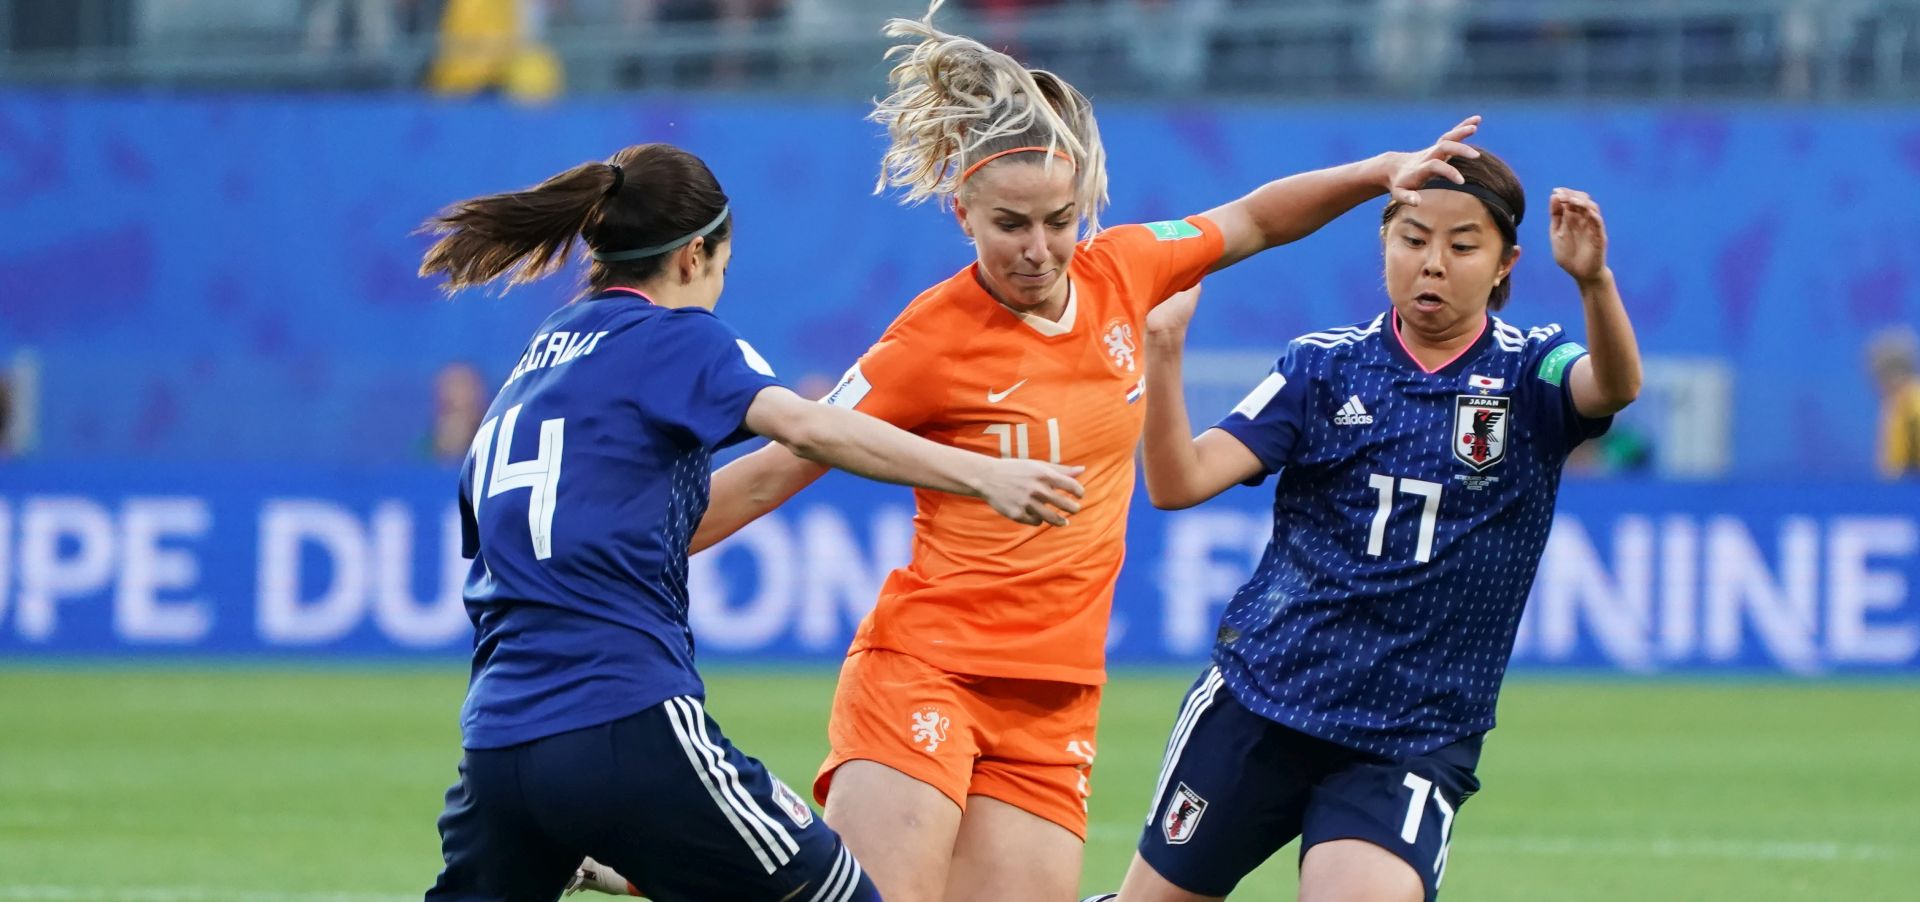 epa07673381 Jackie Groenen of Netherlands against Narumi Miura of Japan  during the round of 16 match between Netherlands and Japan at the FIFA Women's World Cup 2019 in Rennes, France, 25 June 2019.  EPA/EDDY LEMAISTRE